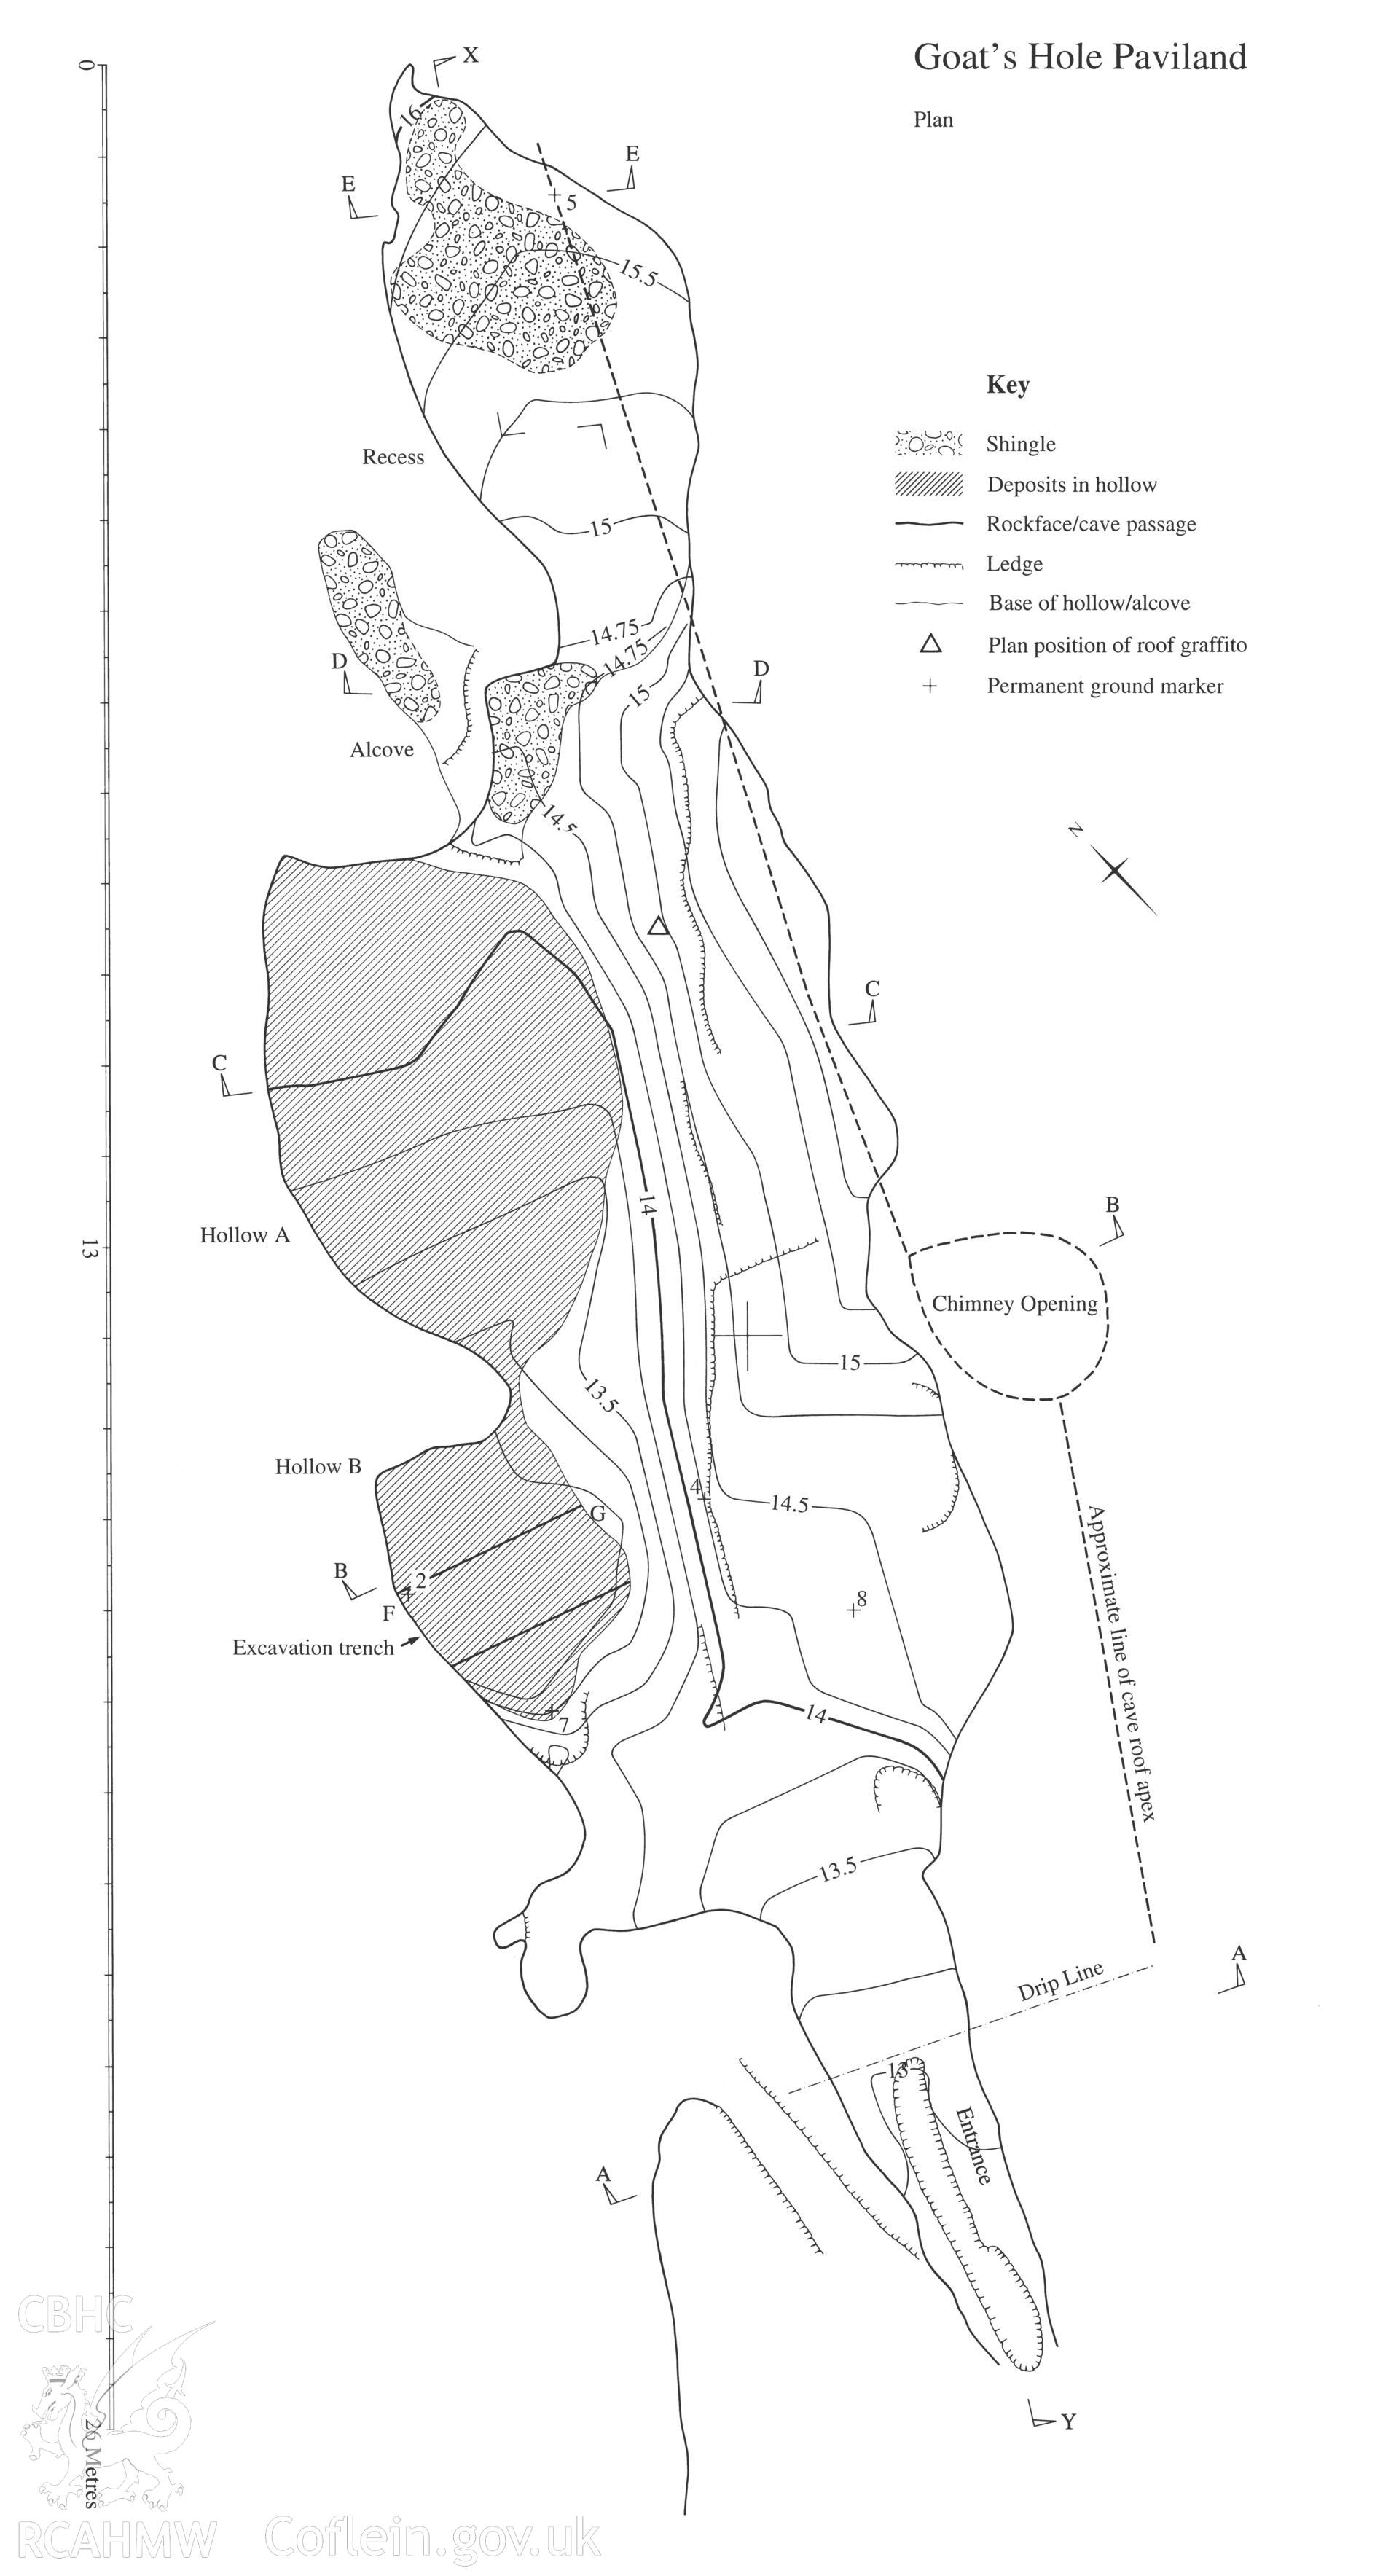 Composite plan comprising three drawings, showing Goat's Hole Cave, Paviland, produced by RCAHMW, published in "Paviland Cave and the Red Lady - a definitive report" by Stephen Aldhouse-Green 2000